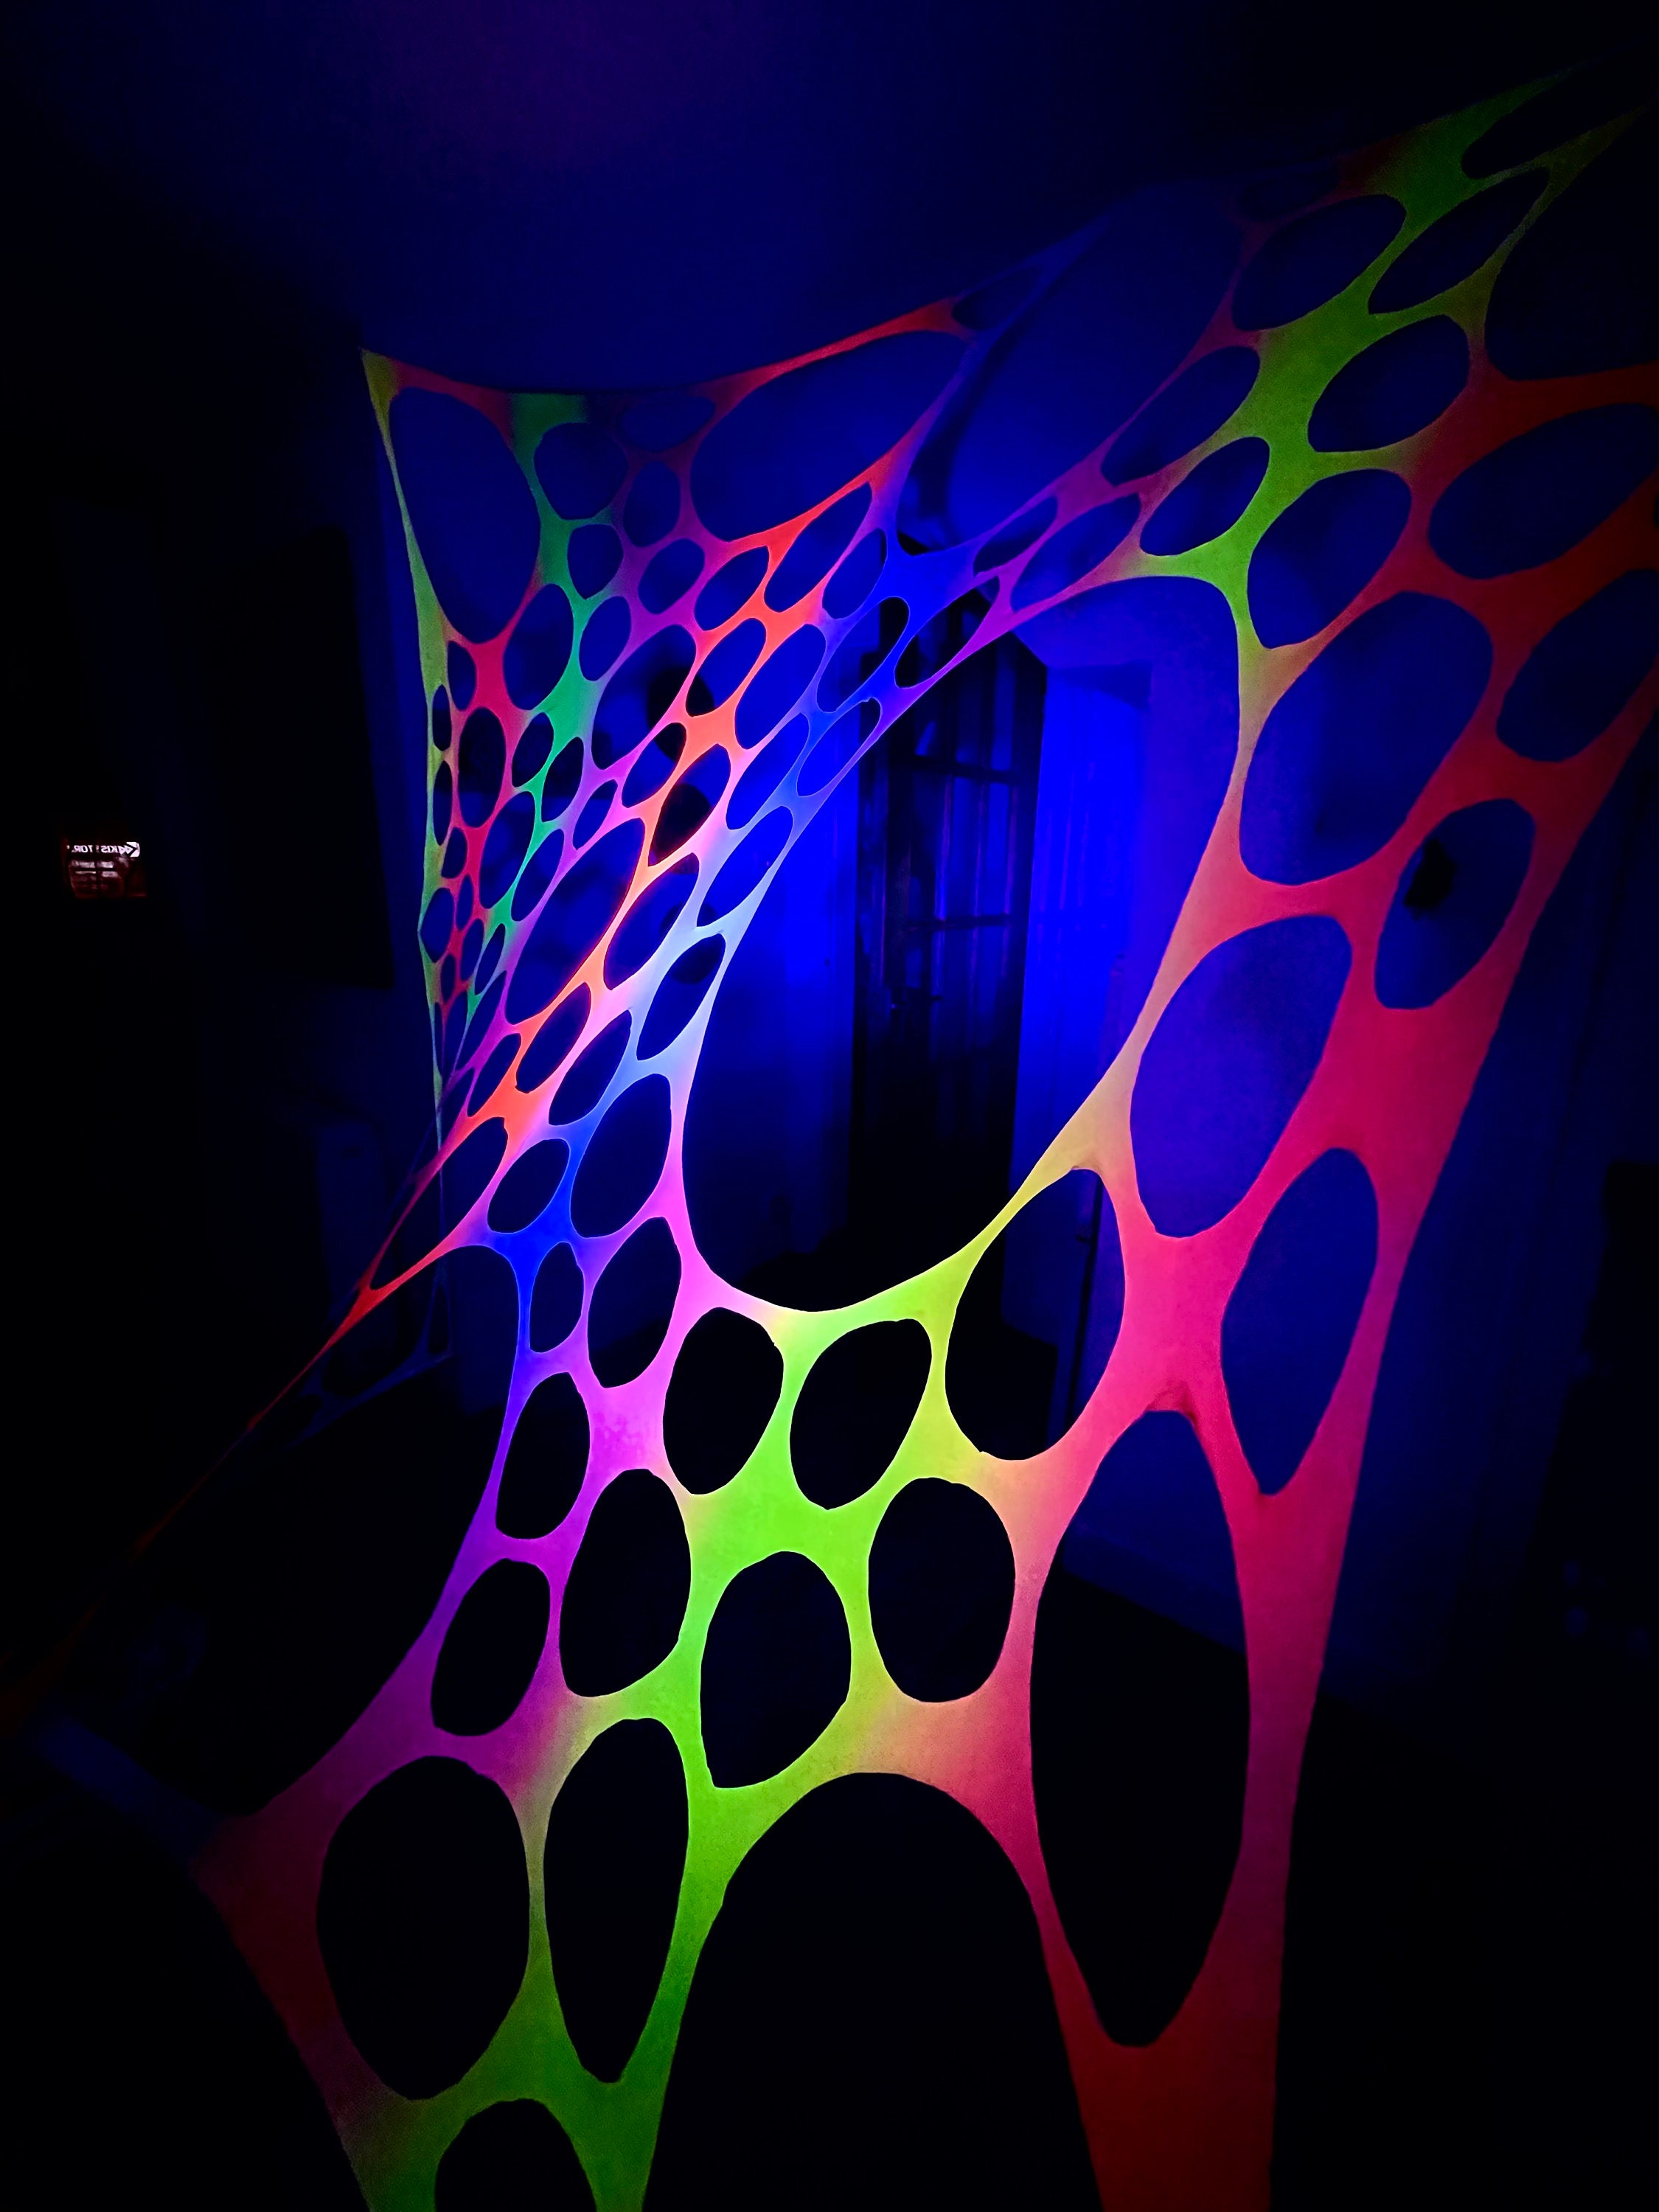 UV Geometric Ceiling Canopy, Stretch Decor,uv Decor, Black Light Tapestry, Glow  in the Dark Decorations, Event Planner, Trippy Wall Hanging. 